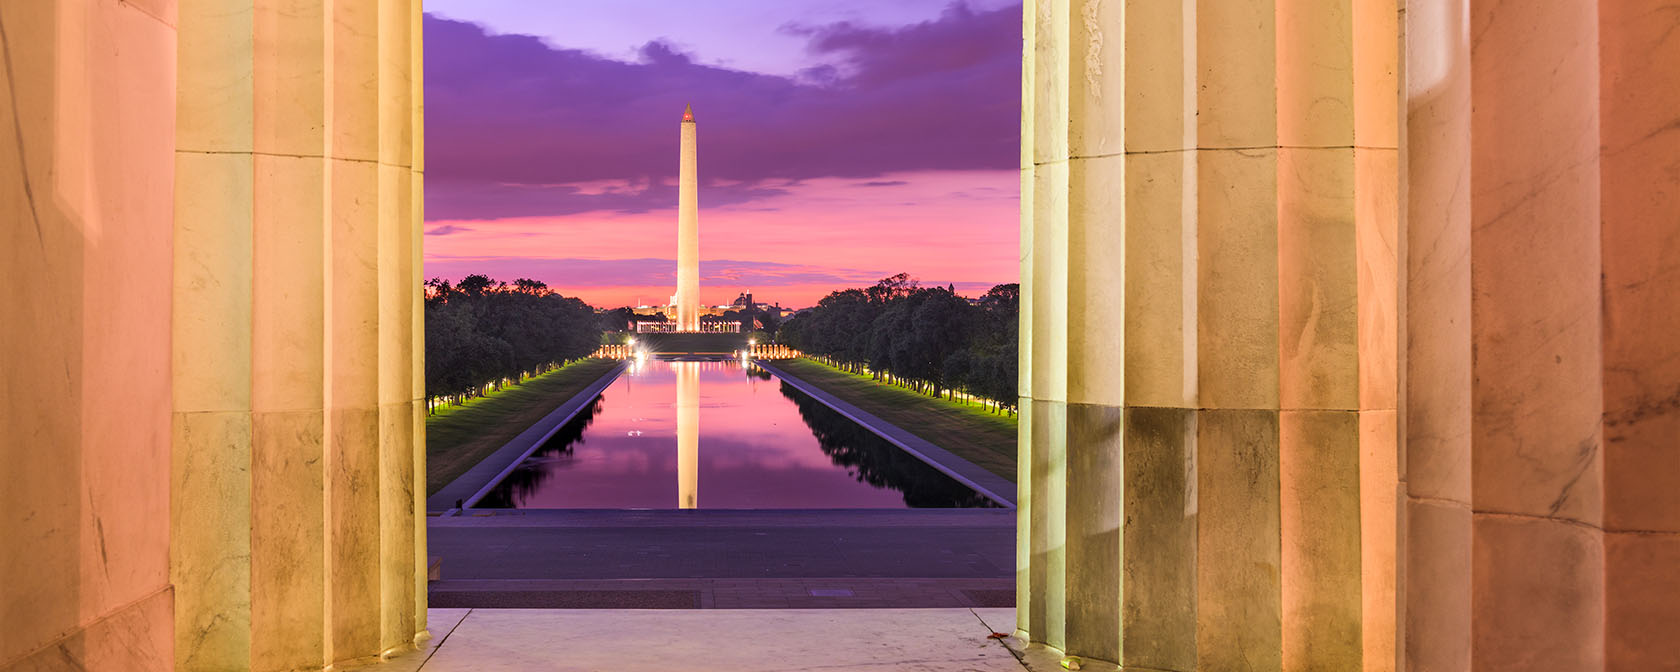 view of the Washington Monument and Reflecting Pool from the Lincoln Memorial with pretty sunset colors